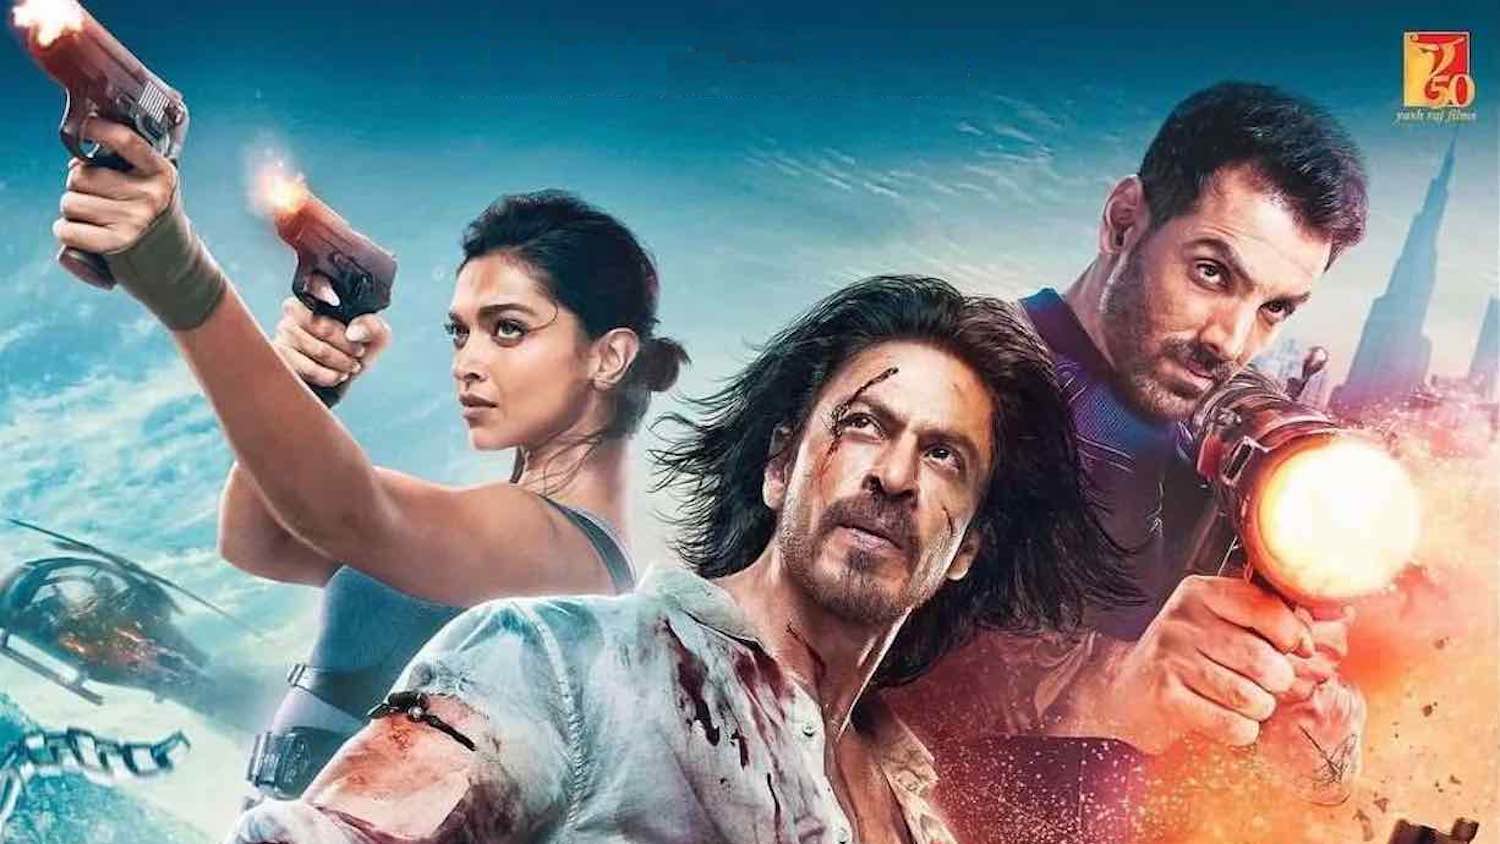 The India Box Office Report: January 2023